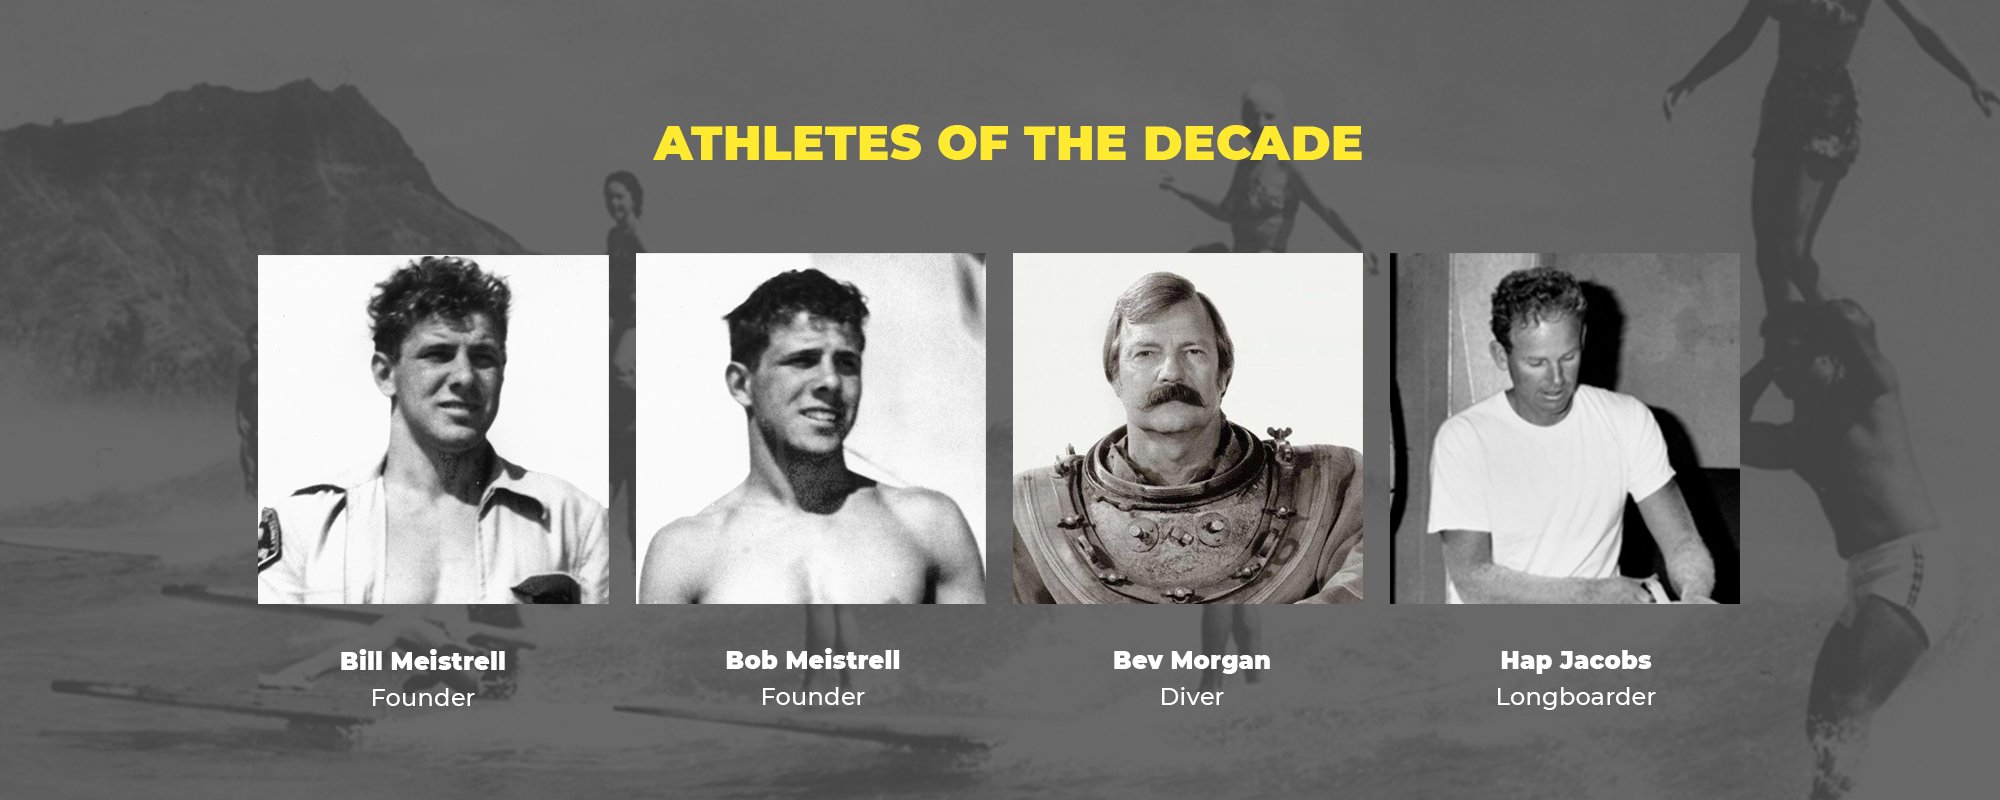 Athletes of the Decade | Bill Meistrell, Founder | Bob Meistrell, Founder | Bev Morgan, Diver | Hap Jacobs, Longboarder